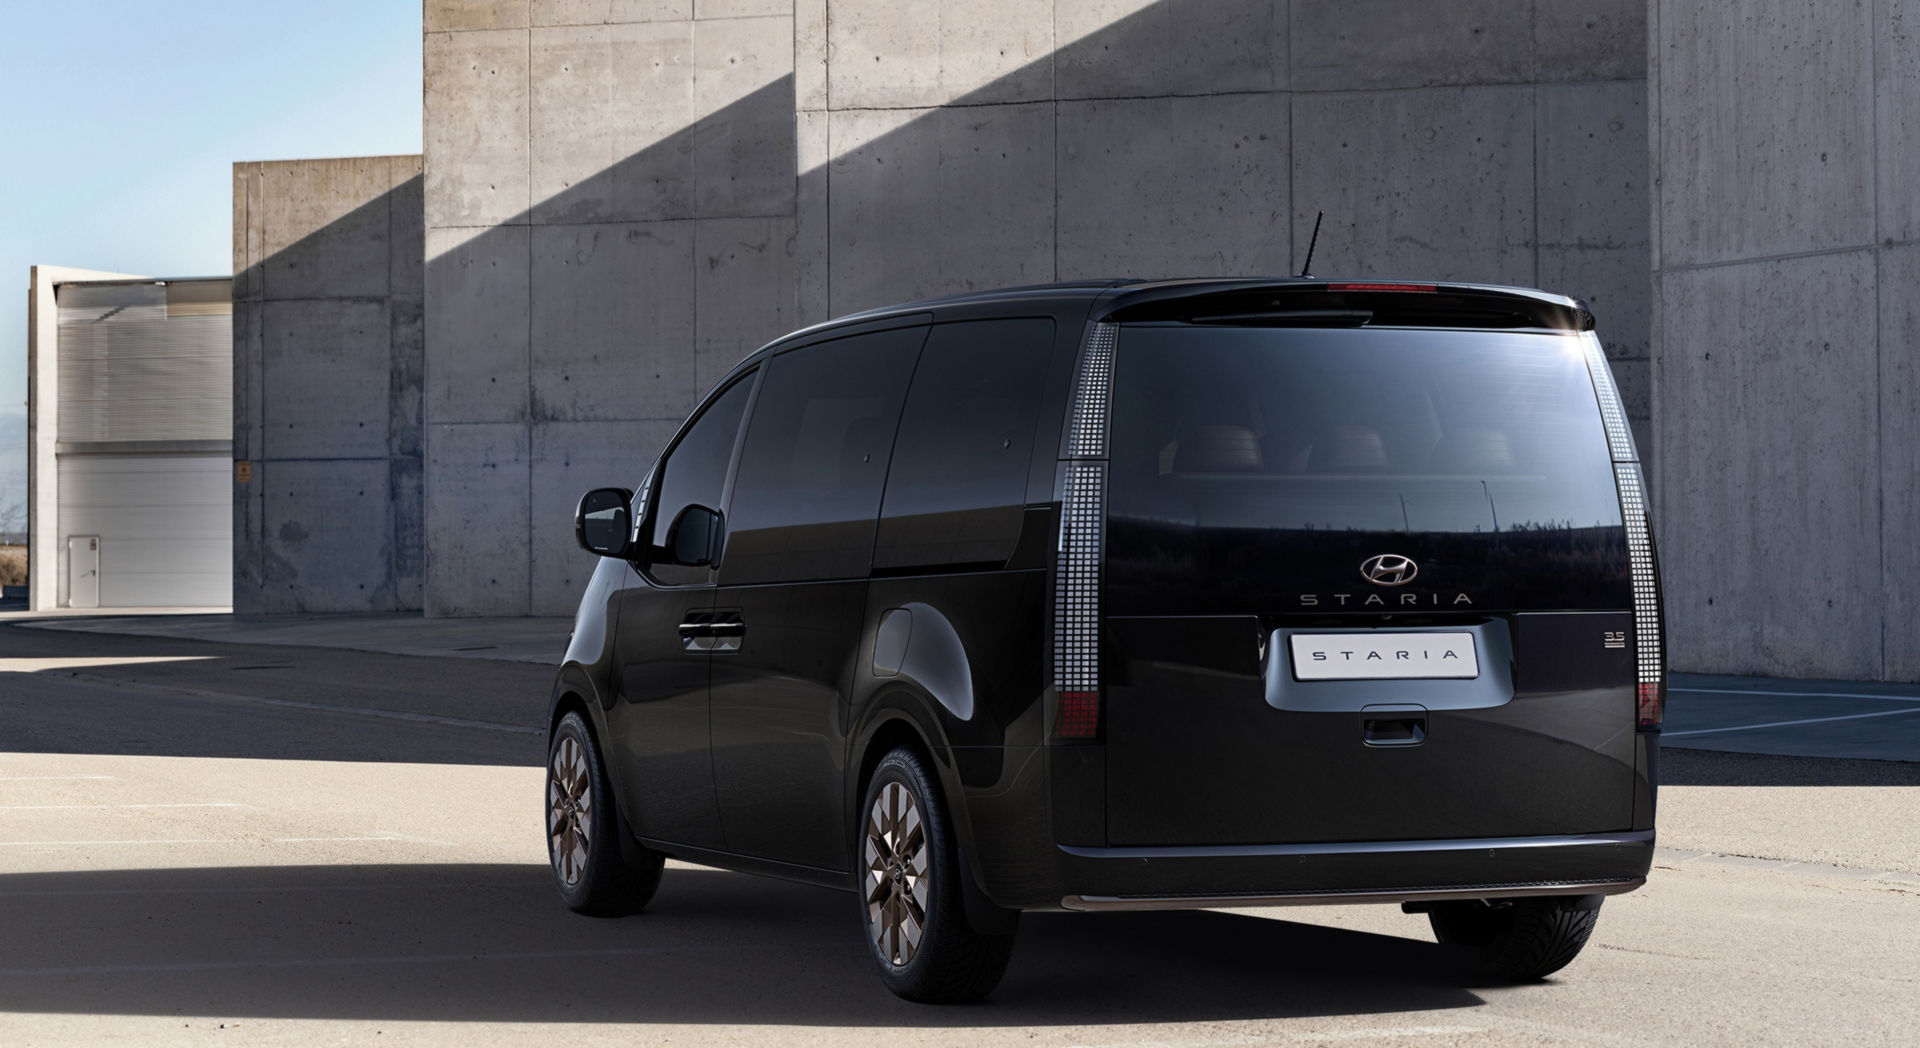 New Hyundai Staria Fully Revealed As A Bold Minivan For The Modern Age